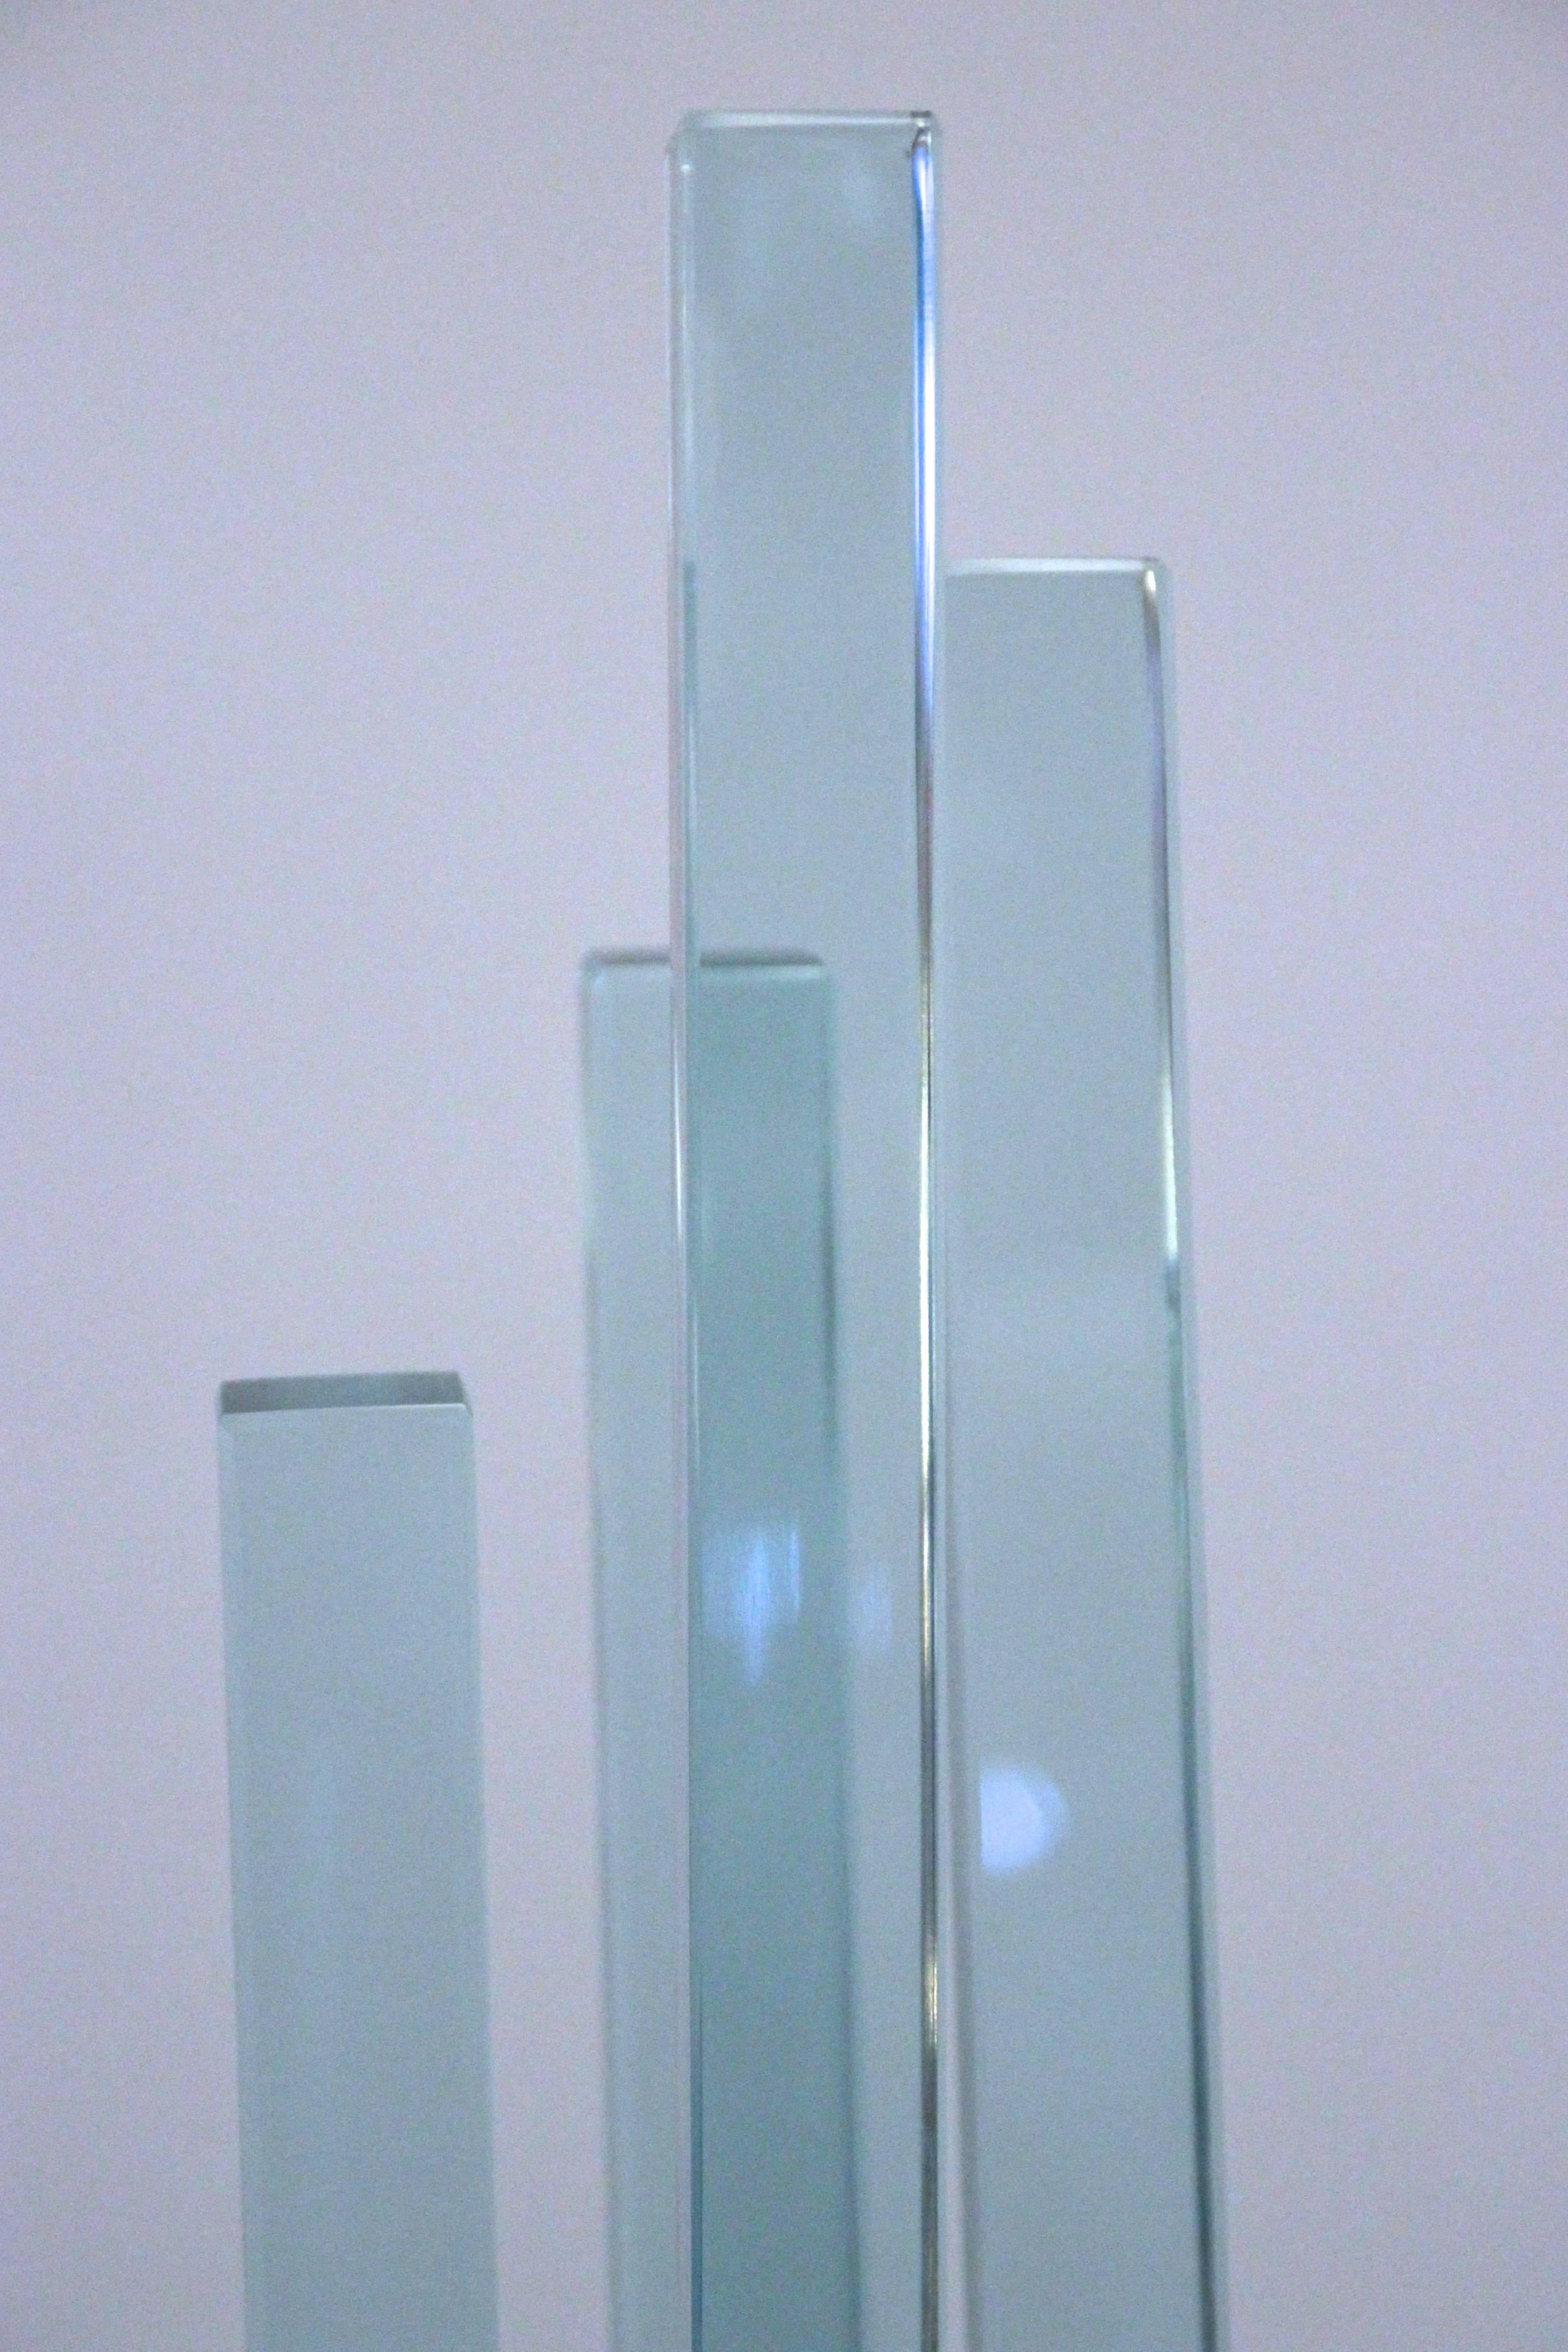 Gallotti and Radicé, pair of lamps,
manufacture Fontana Arte,
structure in glass and metal,
circa 1960, Italy.
Measures: Height 84 cm, width 25 cm, depth 25 cm.